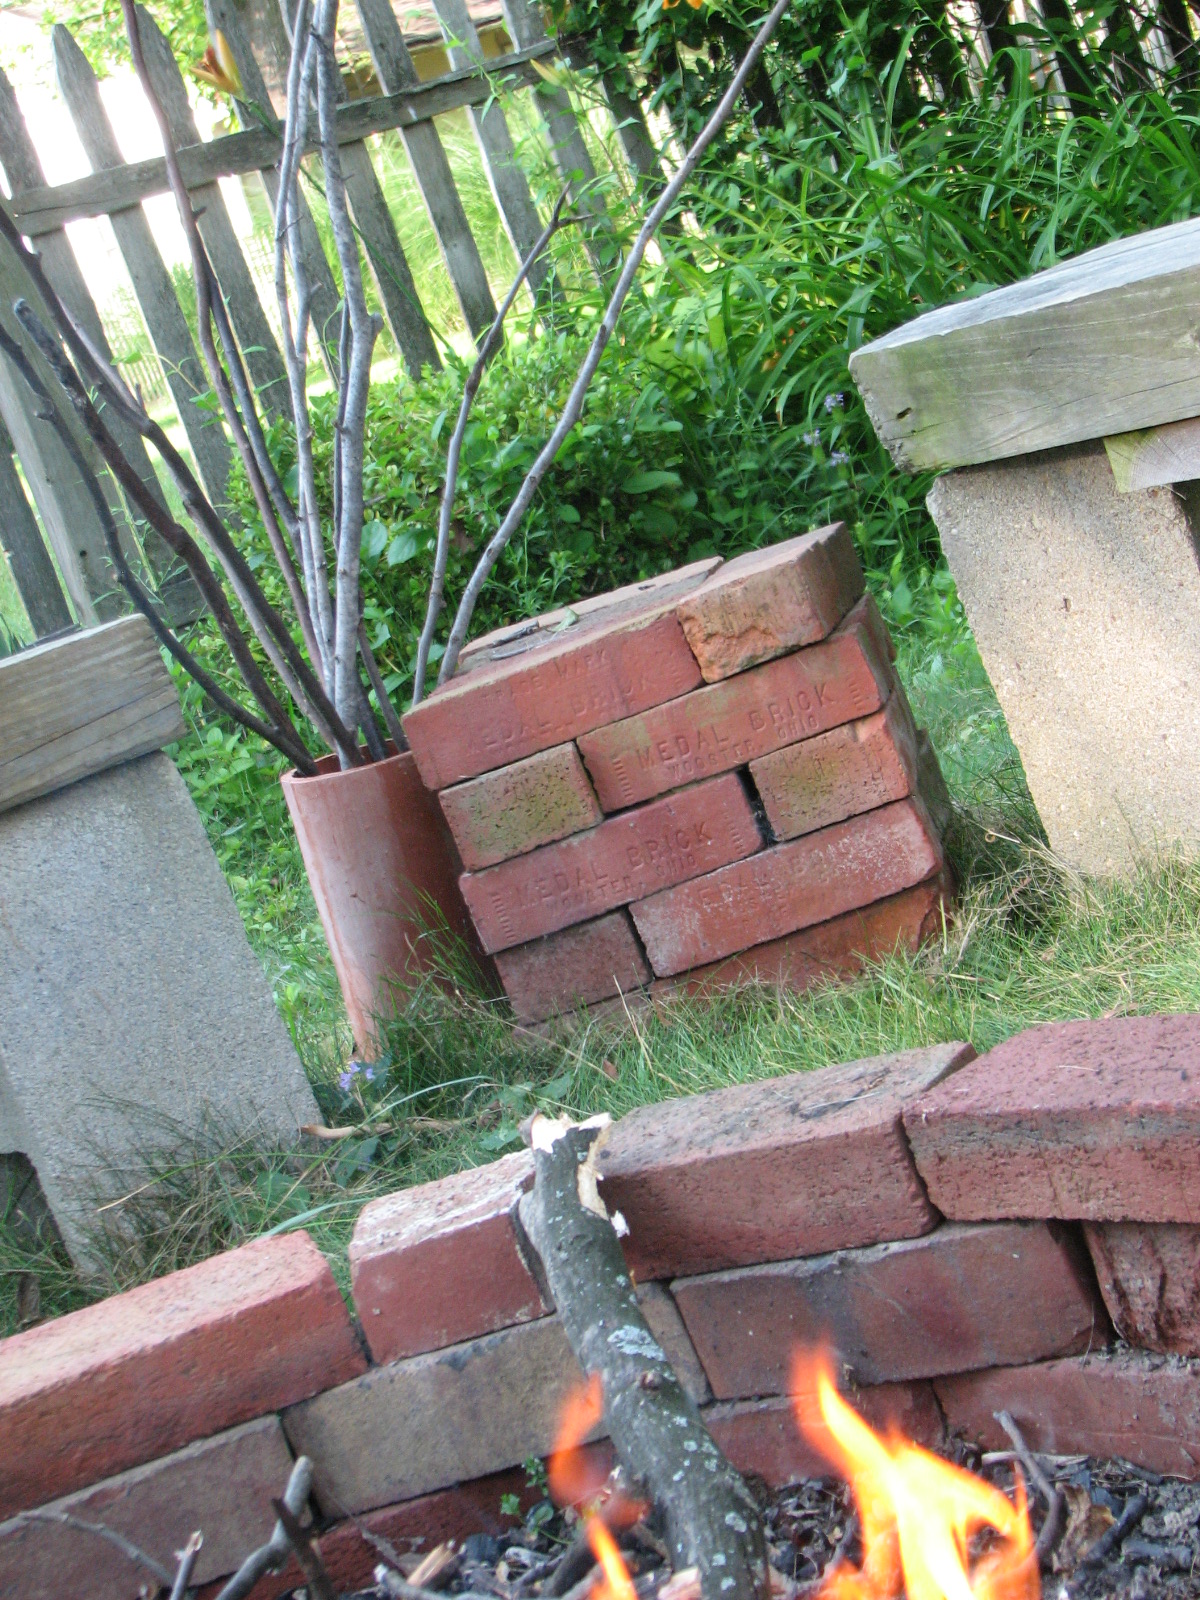 Budget Fire Pit From Reclaimed Brick, How To Make A Homemade Fire Pit With Bricks